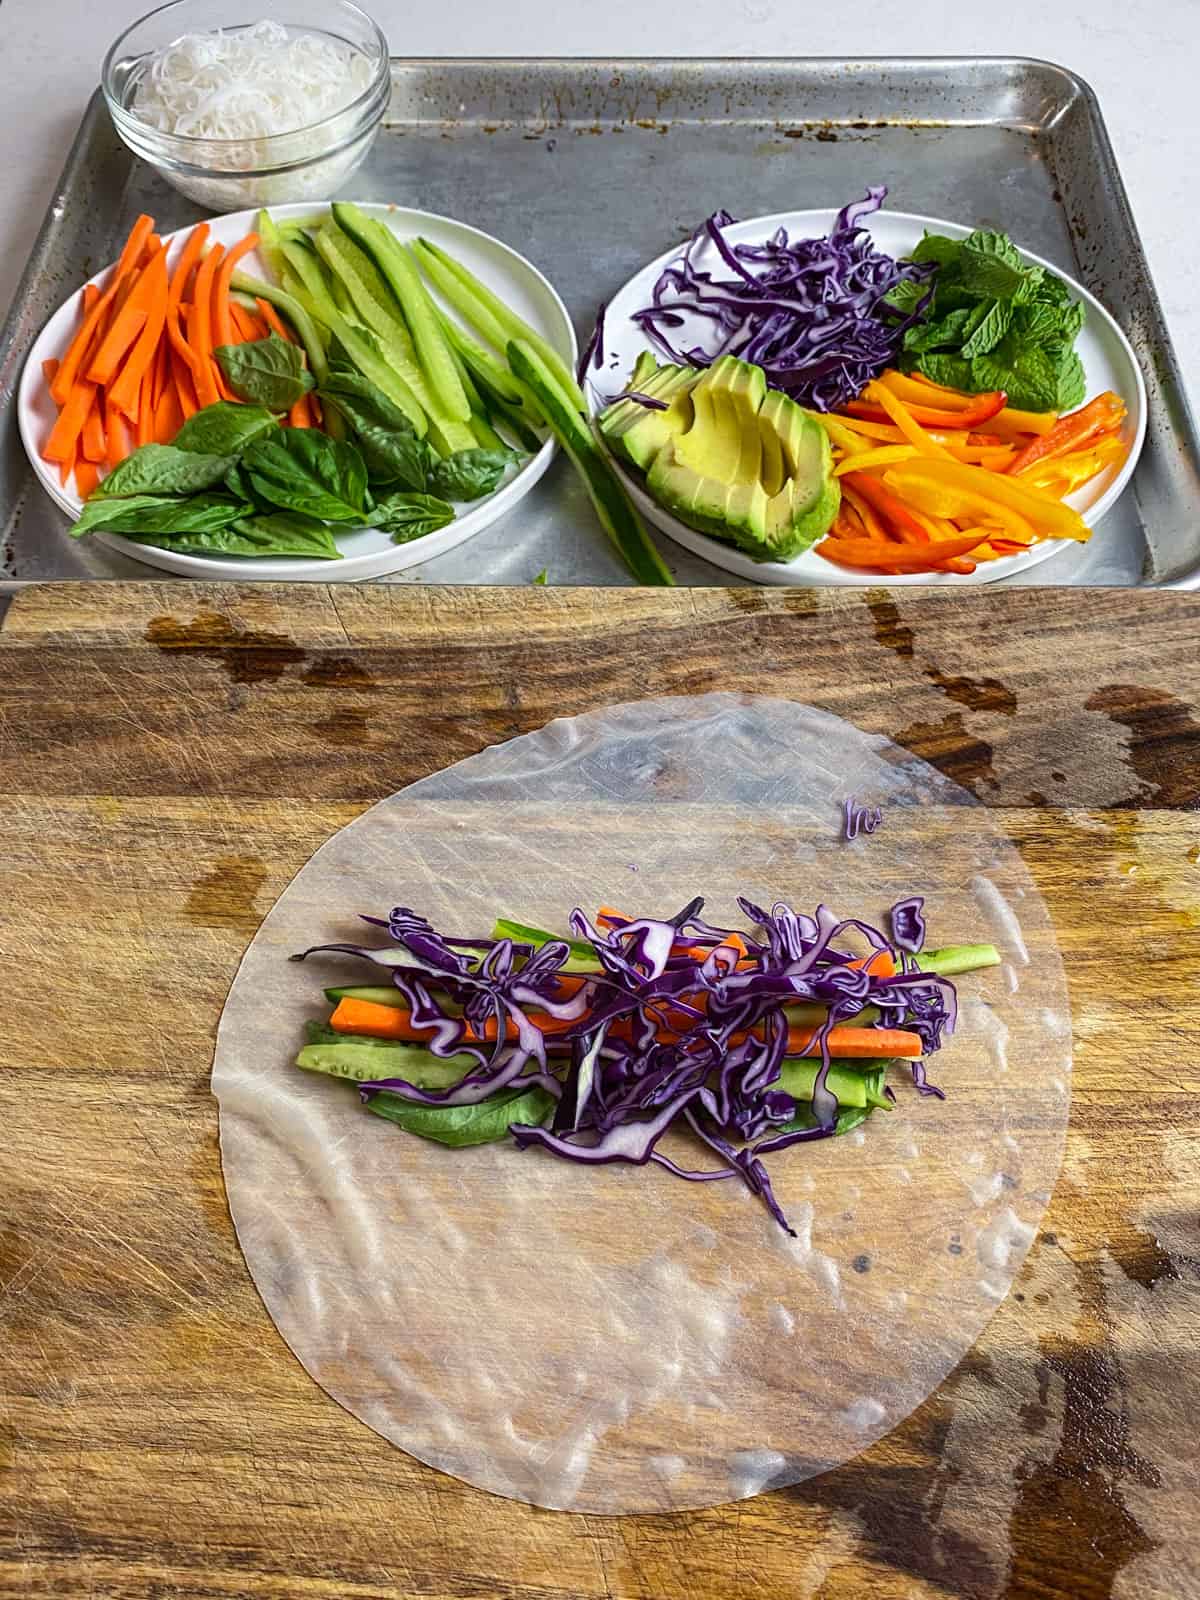 Add vegetables to the fresh spring rolls.